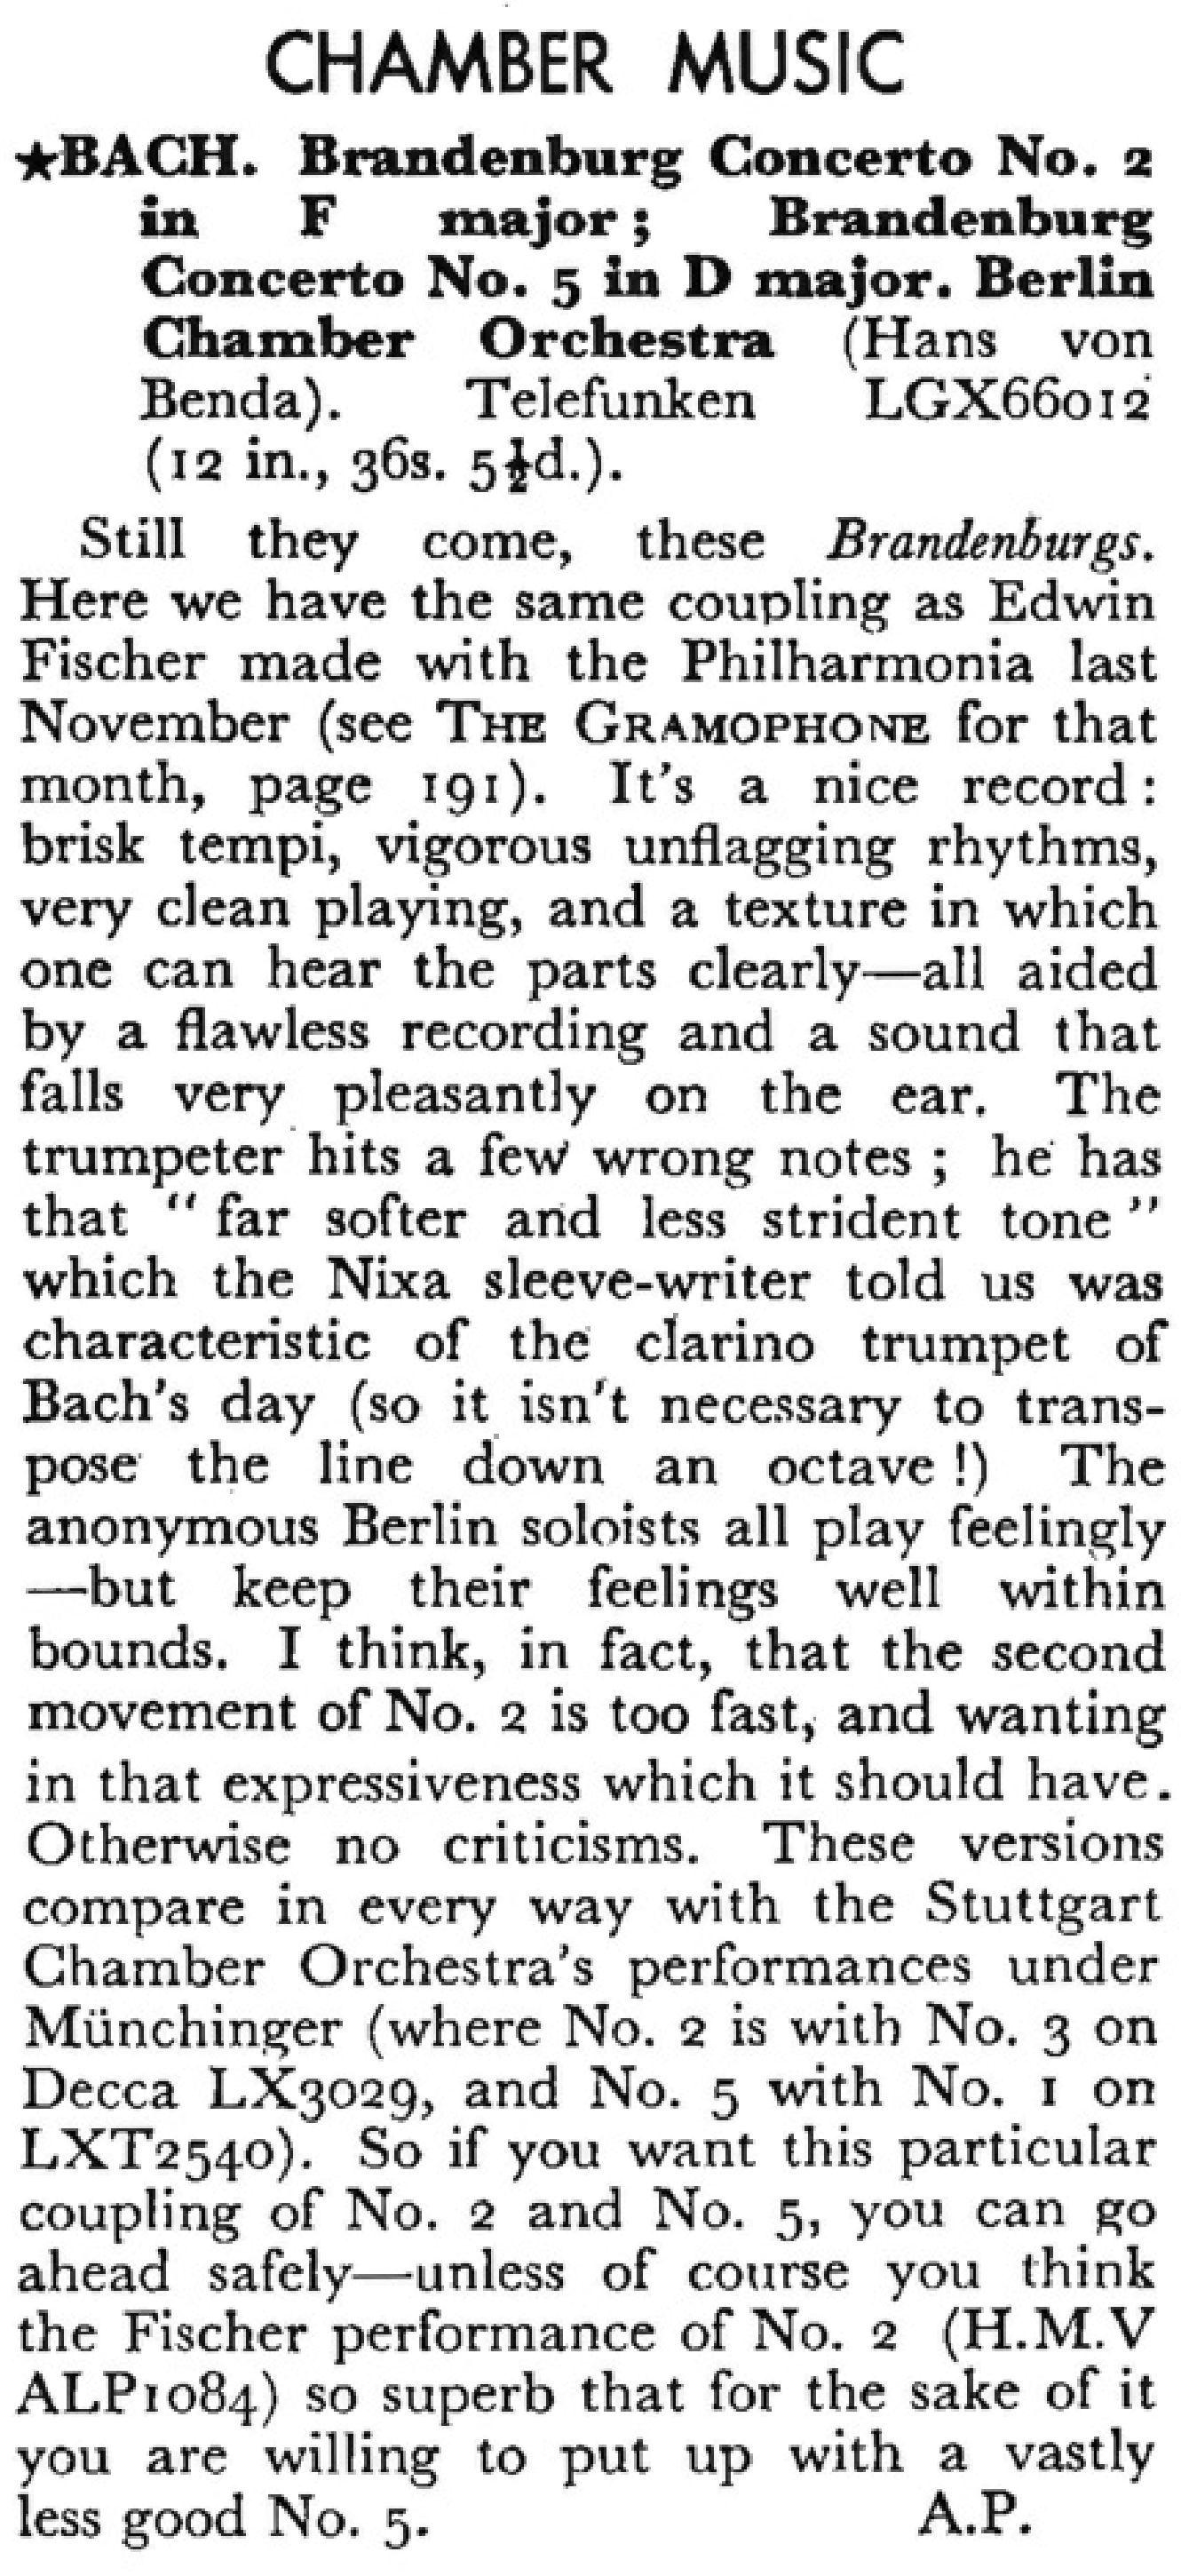 The Gramophone February 1954 page 341 Extrait